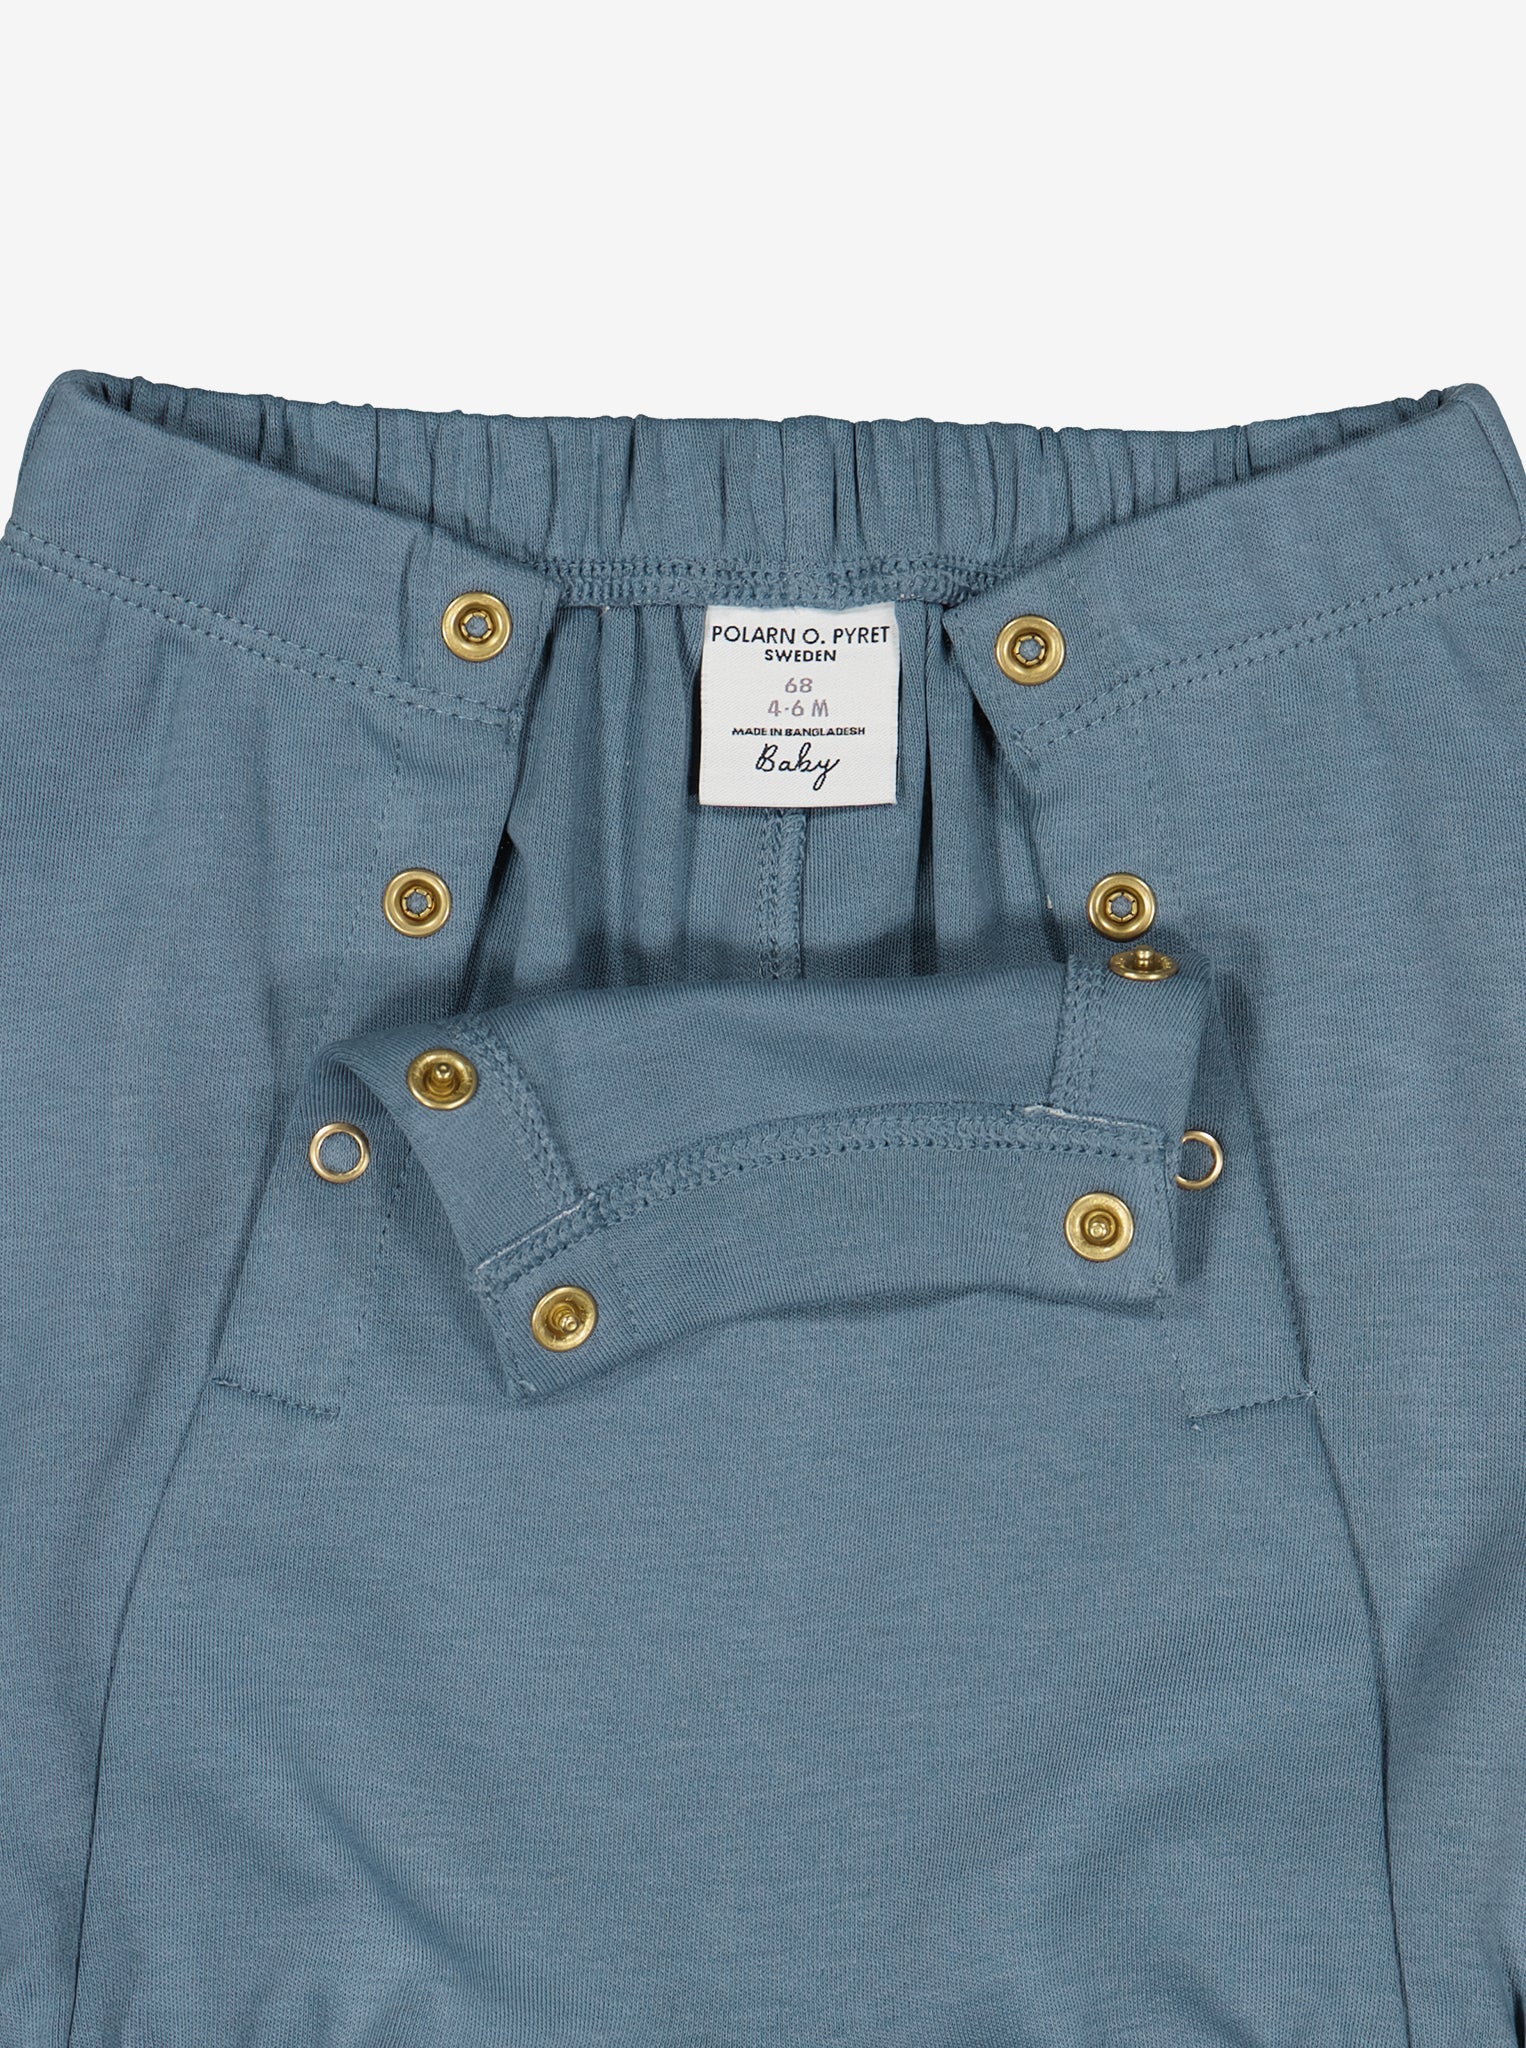 Organic Cotton Blue Baby Shorts from Polarn O. Pyret Kidswear. Made from 100% GOTS Organic Cotton.